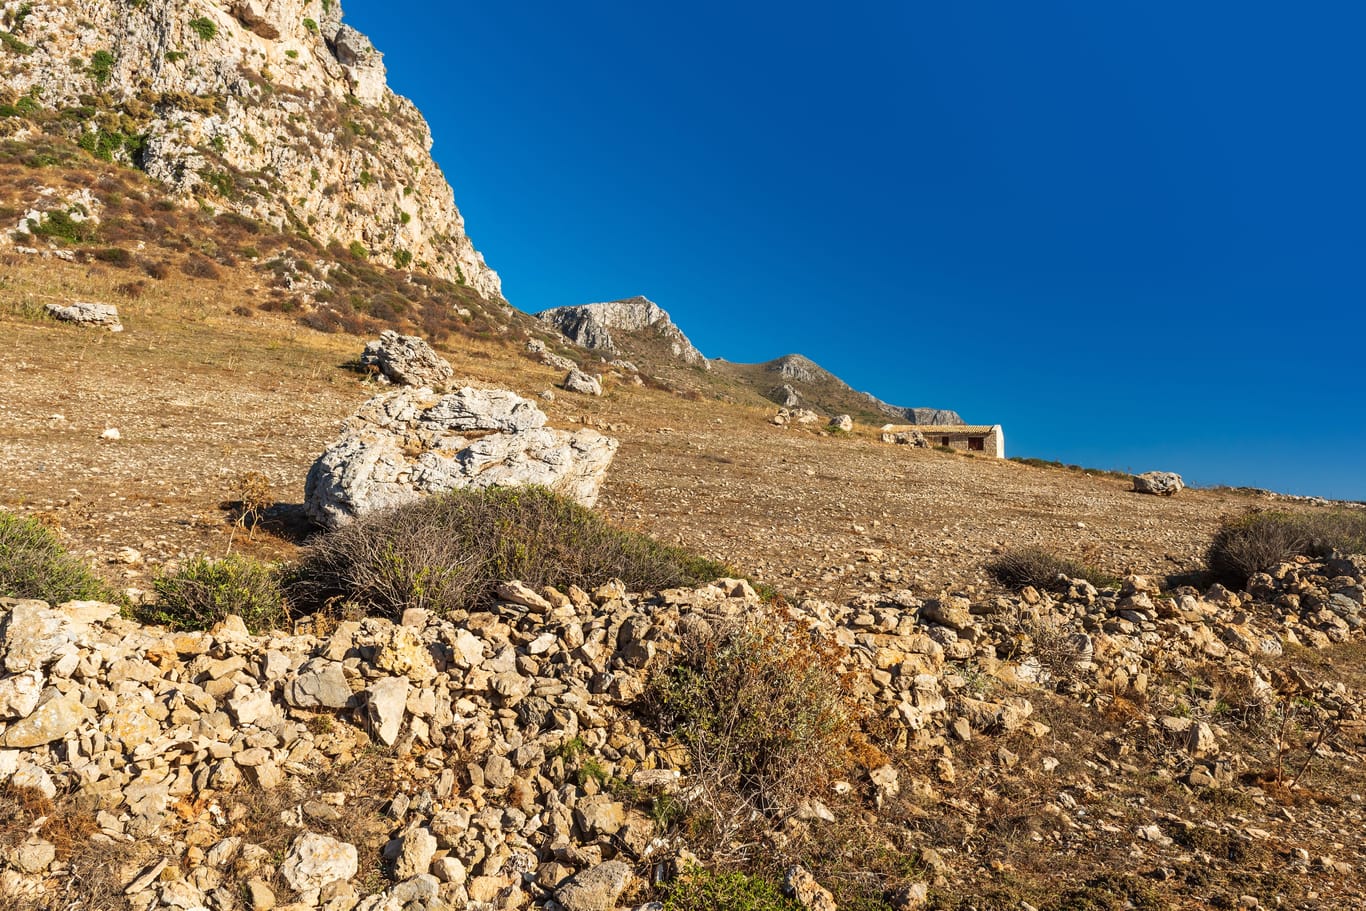 Landscape with rocky ground, rock, wall and house. Sicily